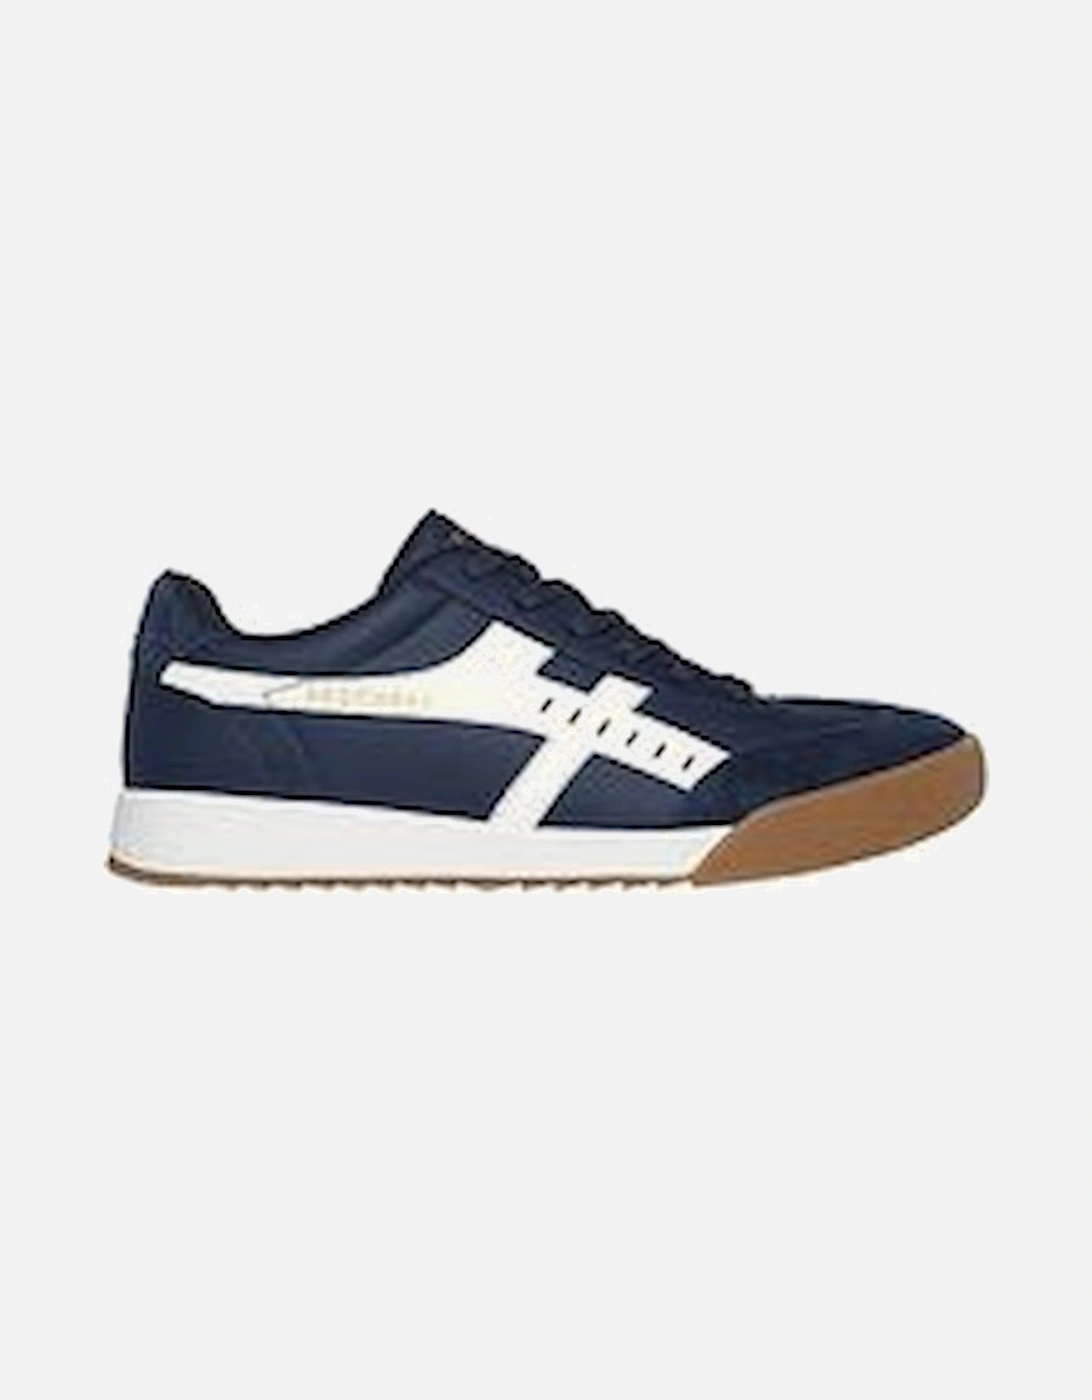 183280 Zinger Manzanilla Totale in Navy/White, 2 of 1